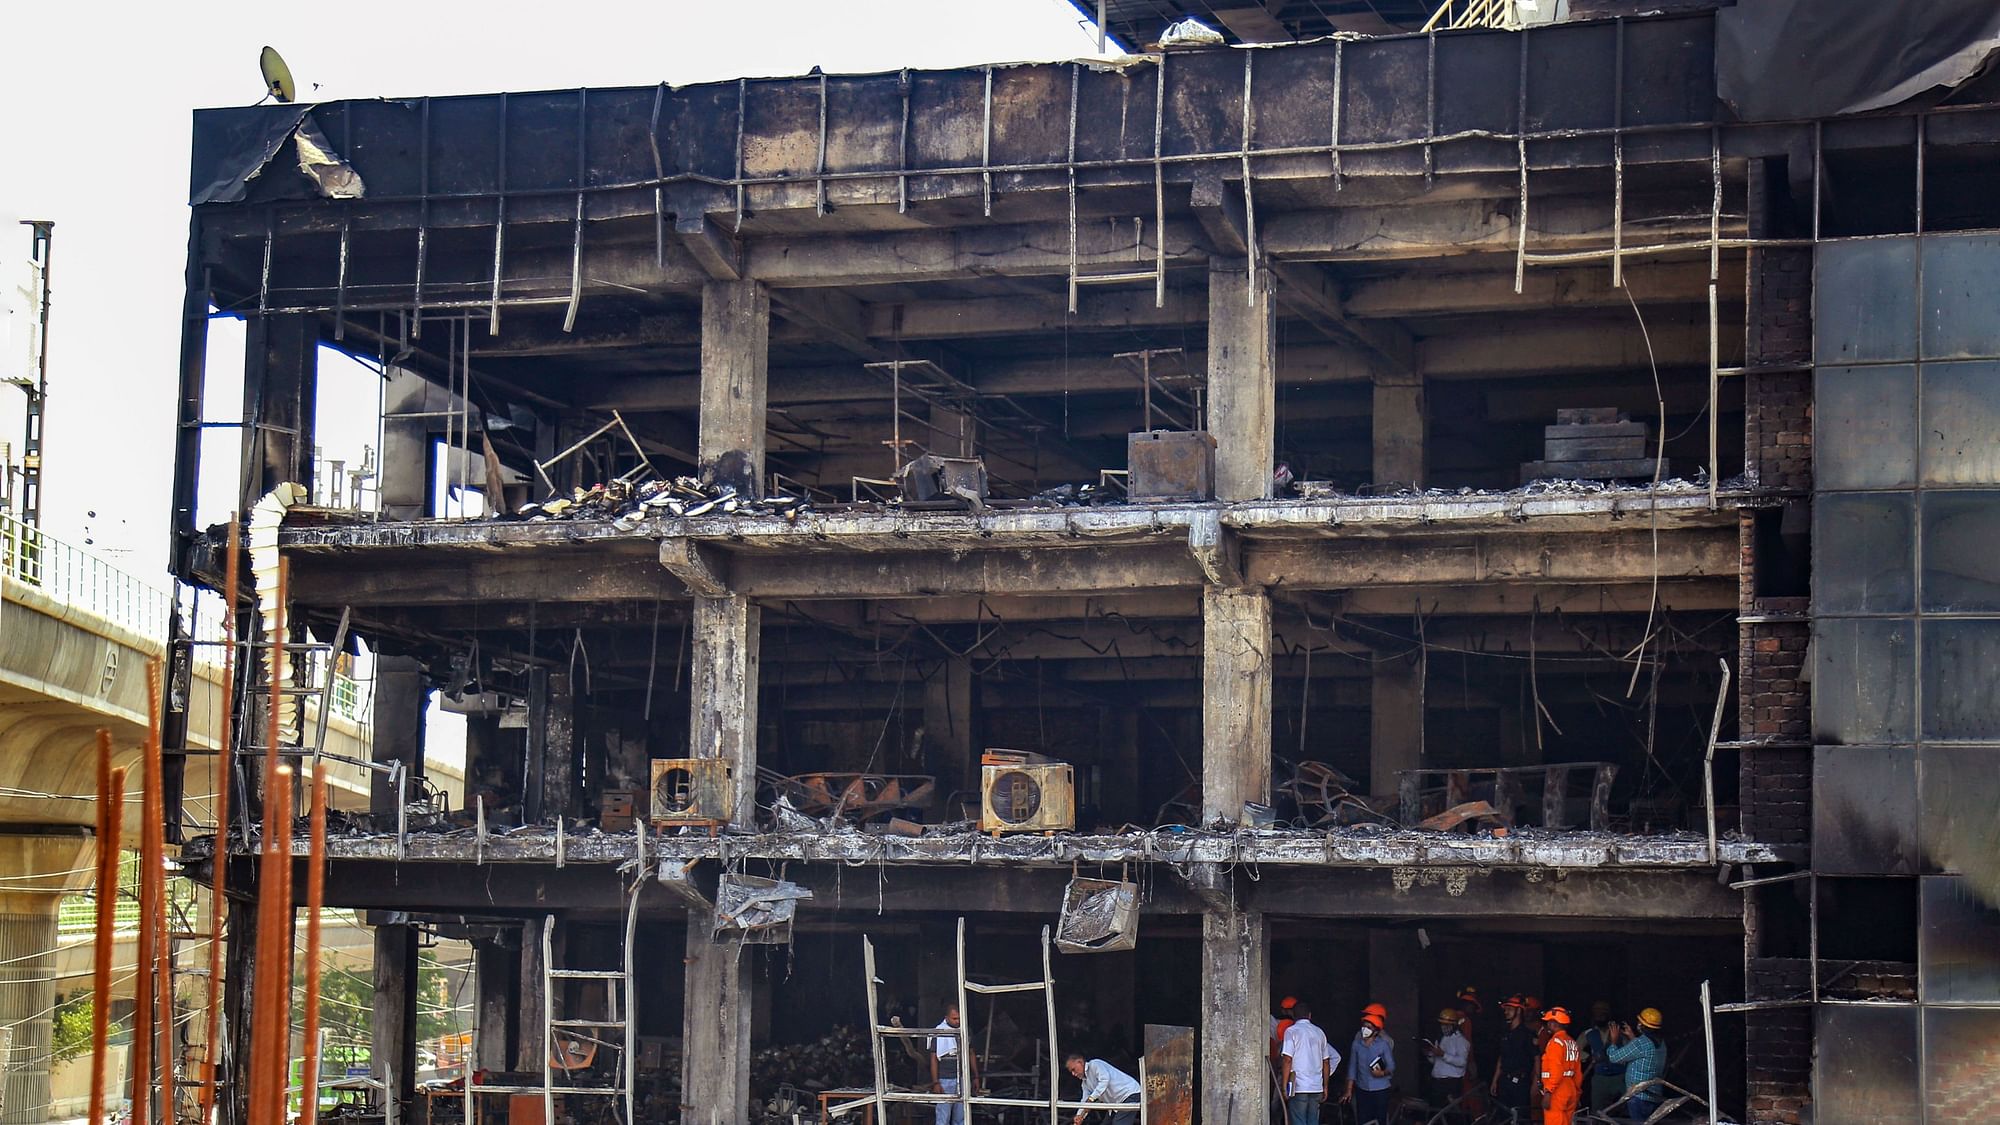 <div class="paragraphs"><p>Manish Lakra, the owner of the building in <a href="https://www.thequint.com/big-story/mundka-fire">Mundka that was gutted</a> in a massive fire on 13 May, along with the owners of a company in the same multistorey structure – Harish Goel and Varun Goel – were on Tuesday, 17 May, sent to one-day police custody by a city court, an official said.</p></div>